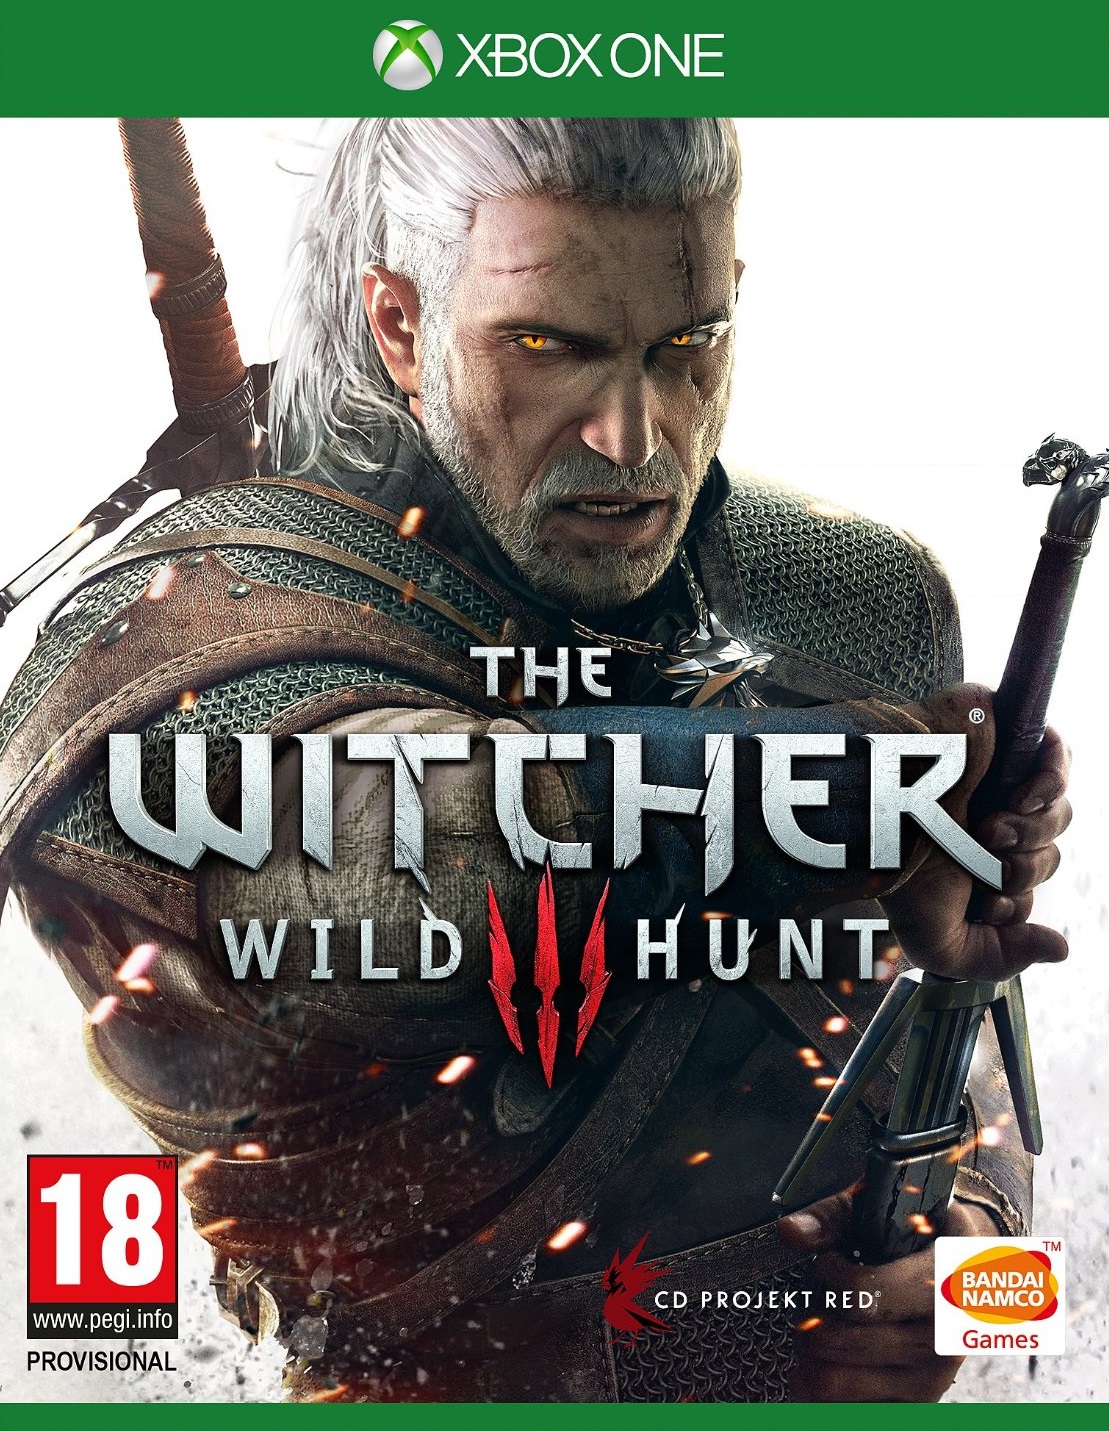 The Witcher se acerca a PS3 y Xbox 360